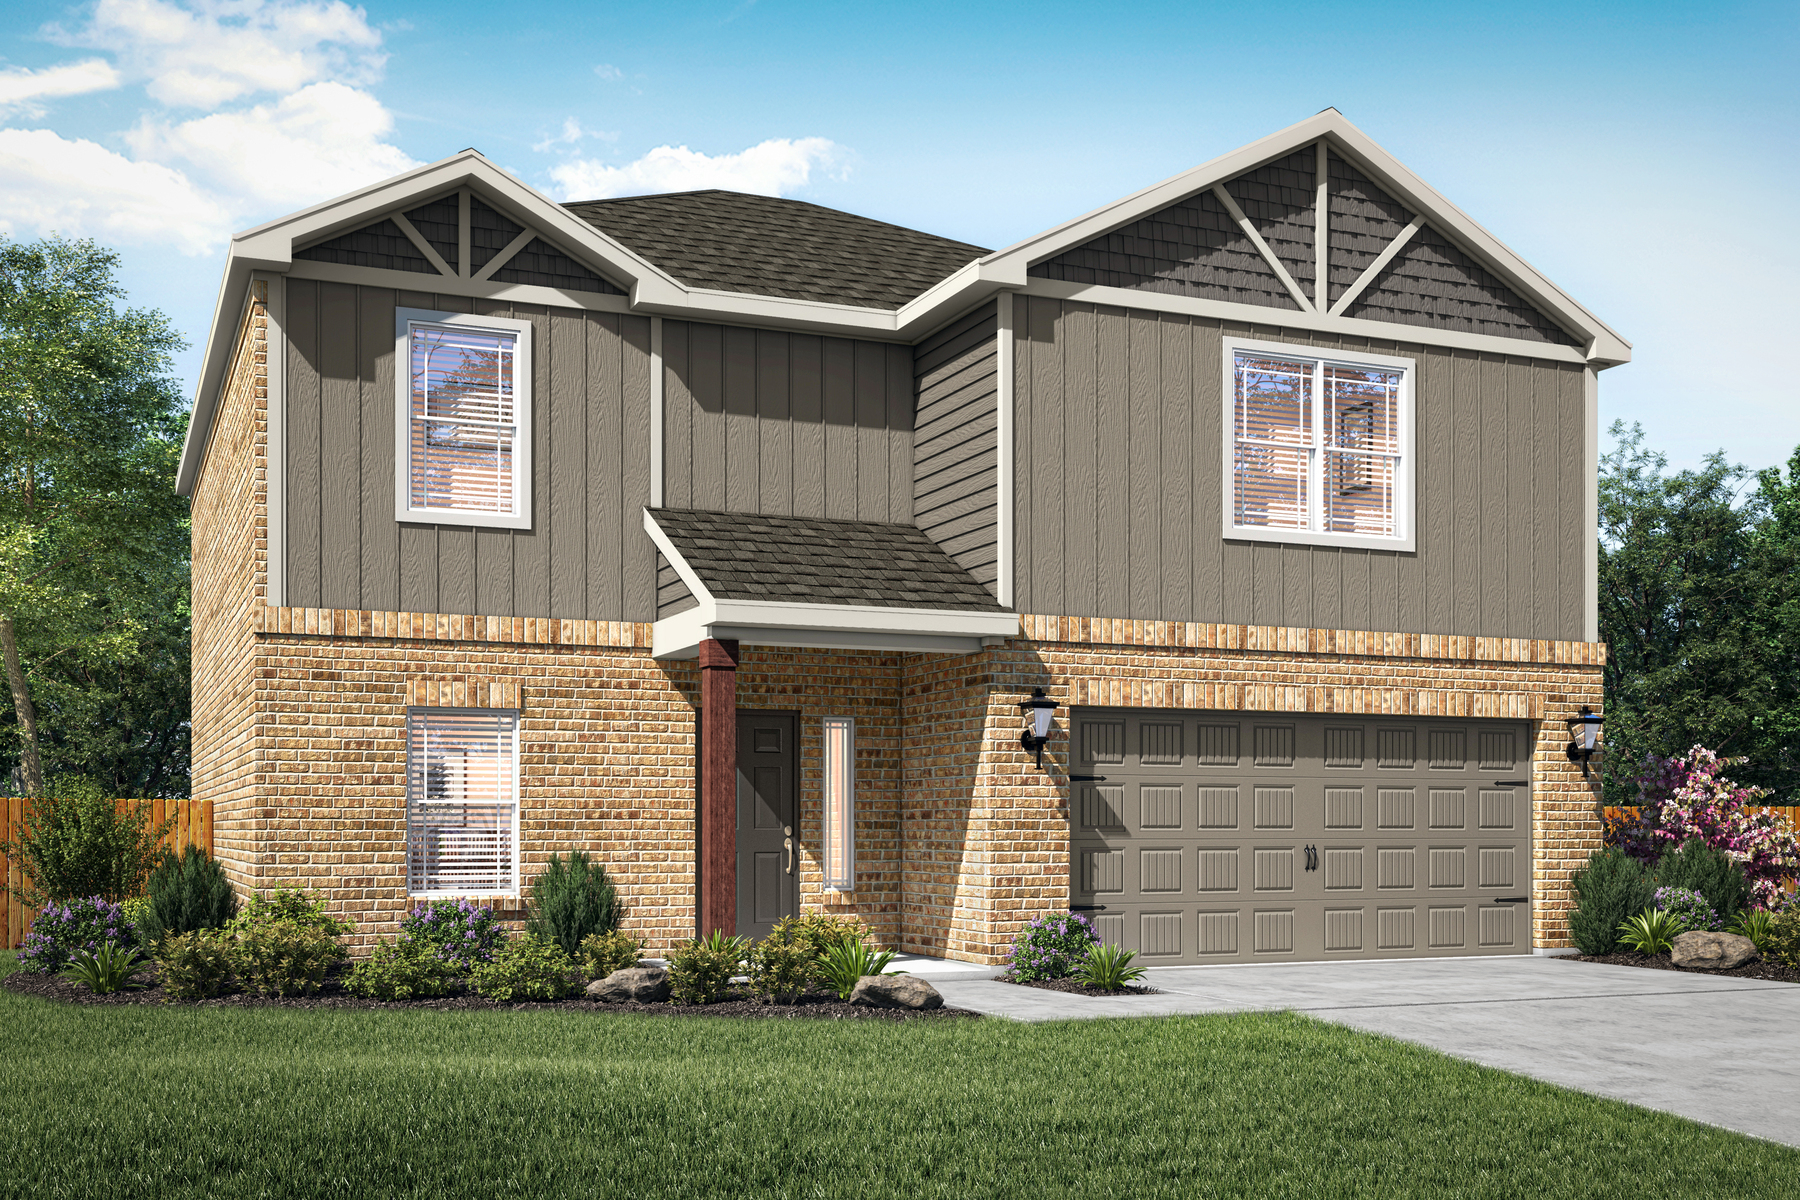 The Sahoma plan is a stunning two-story home available now in the Oklahoma City area.